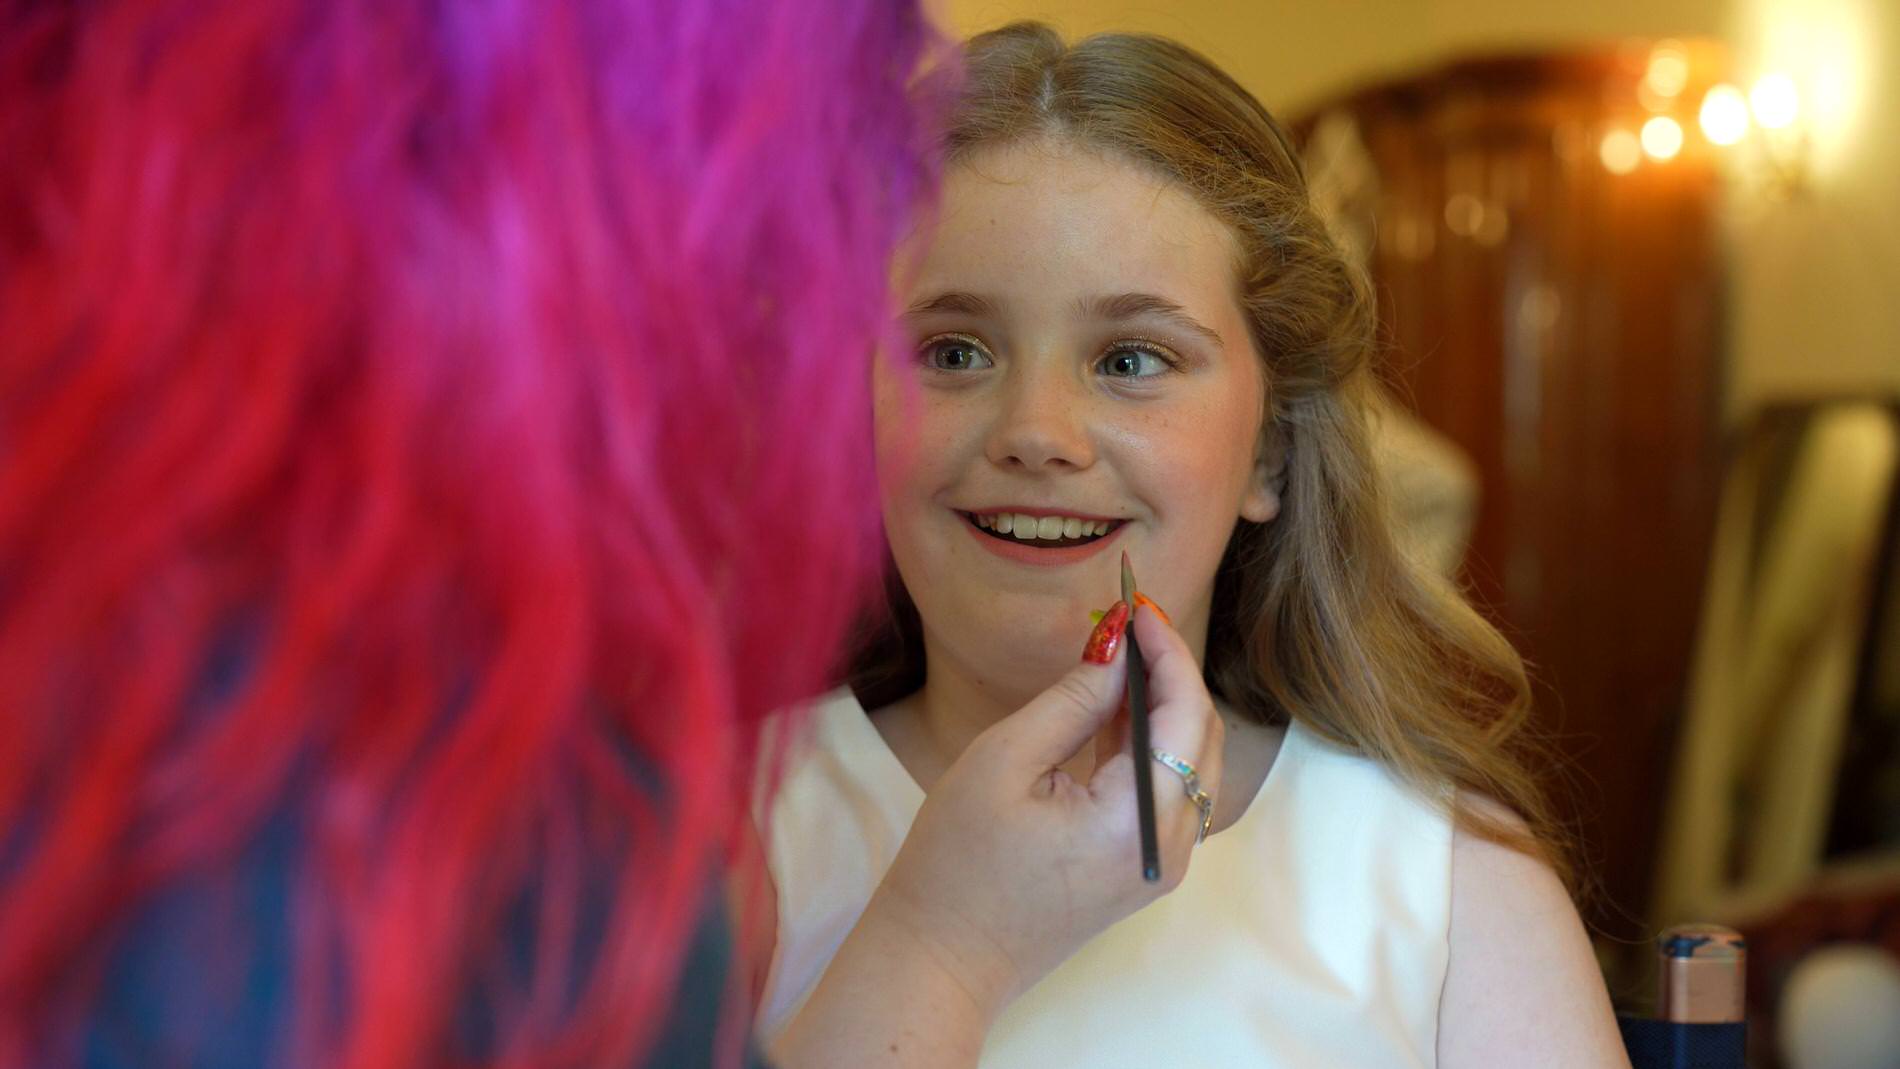 flowergirl smiles as she tries lipstick for the first time at a wedding